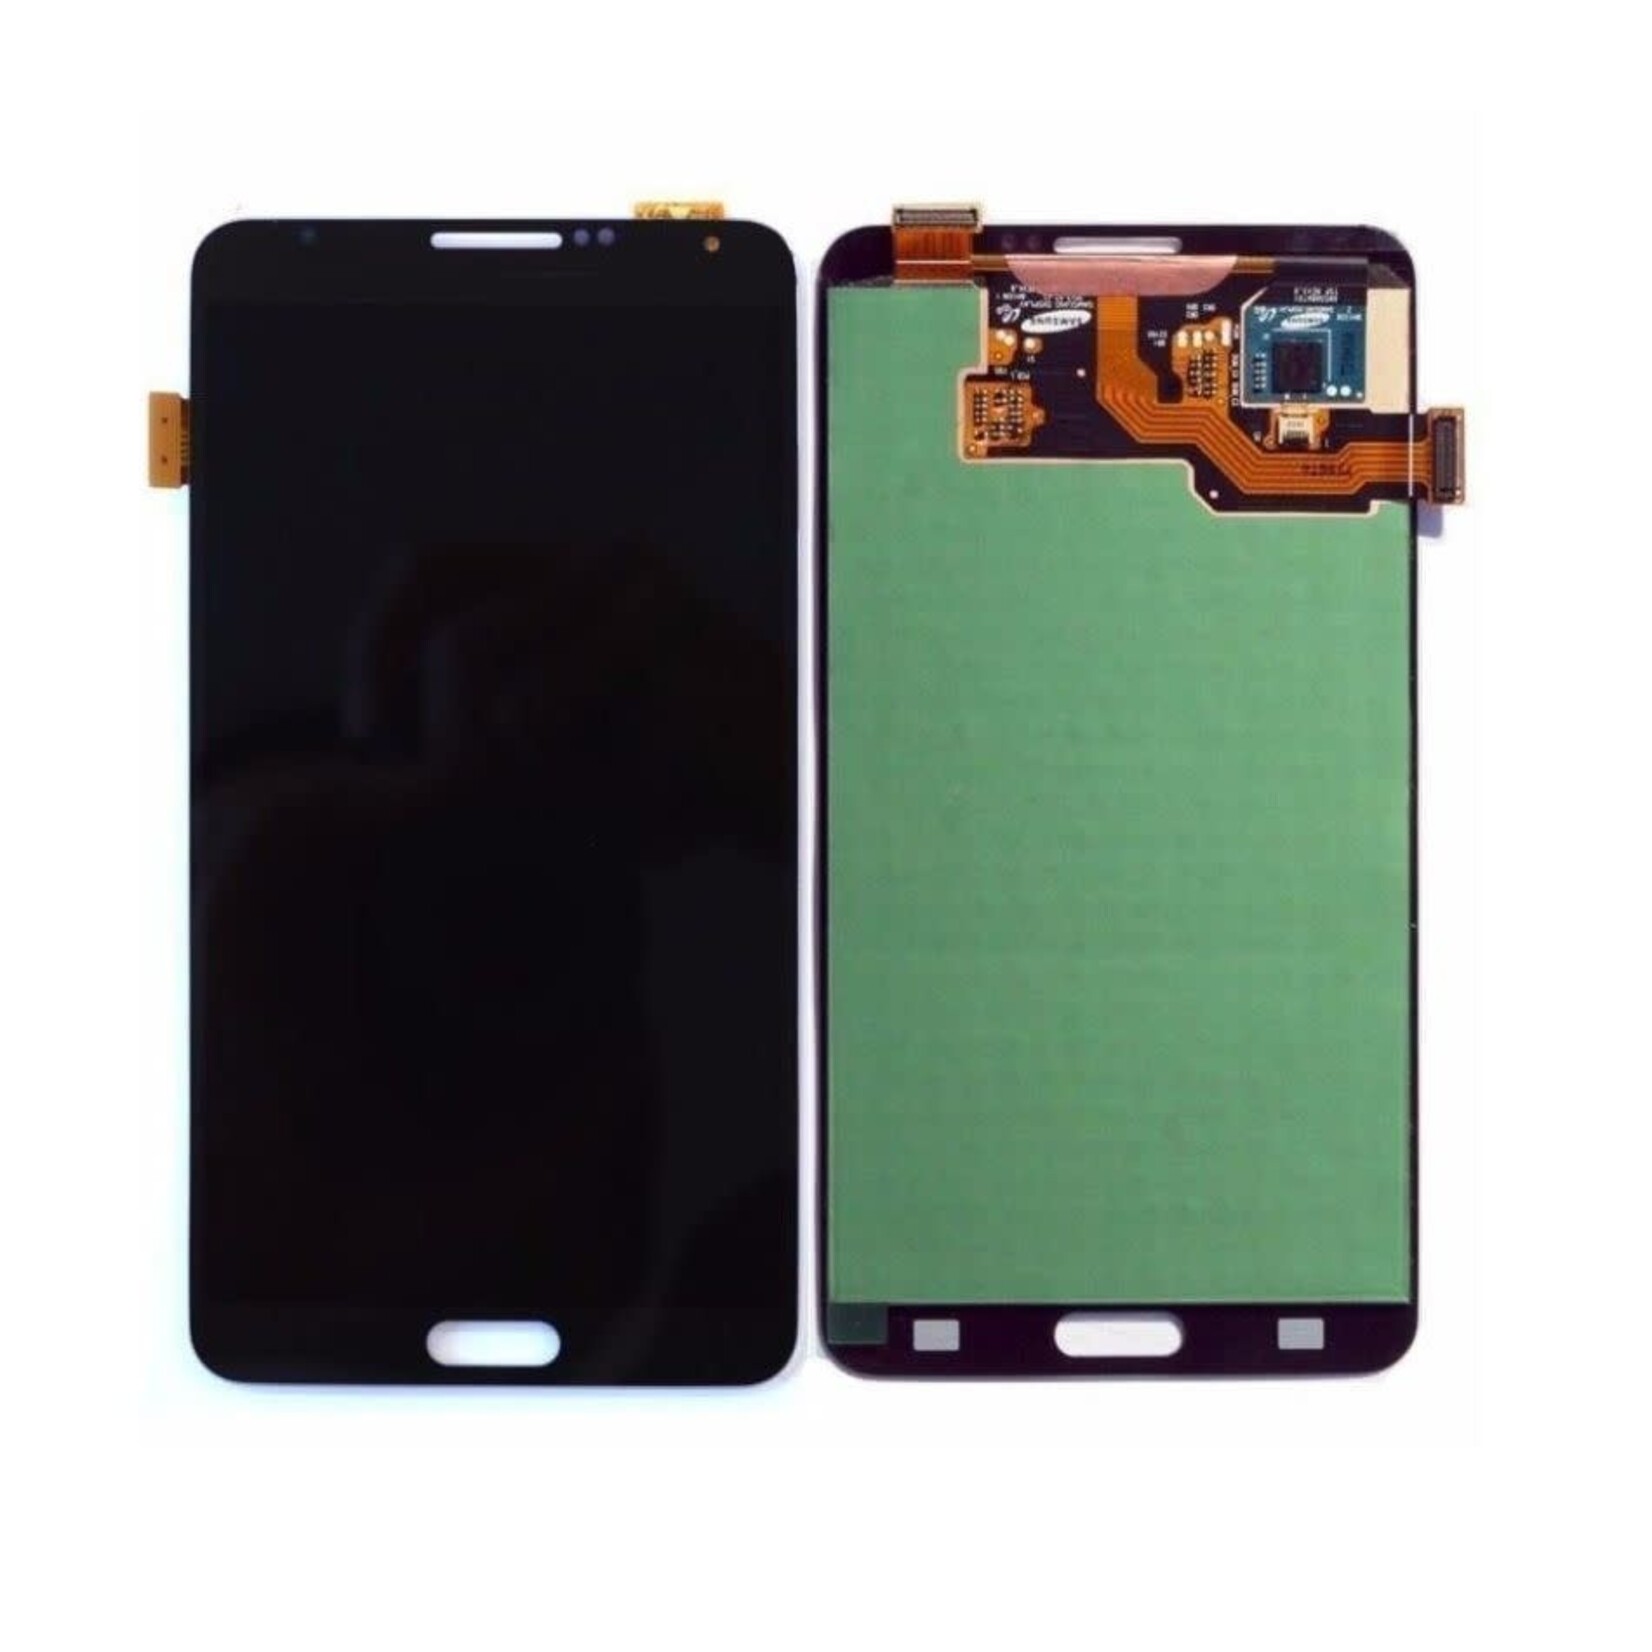 Samsung LCD DIGITIZER ASSEMBLY FOR SAMSUNG GALAXY NOTE 3